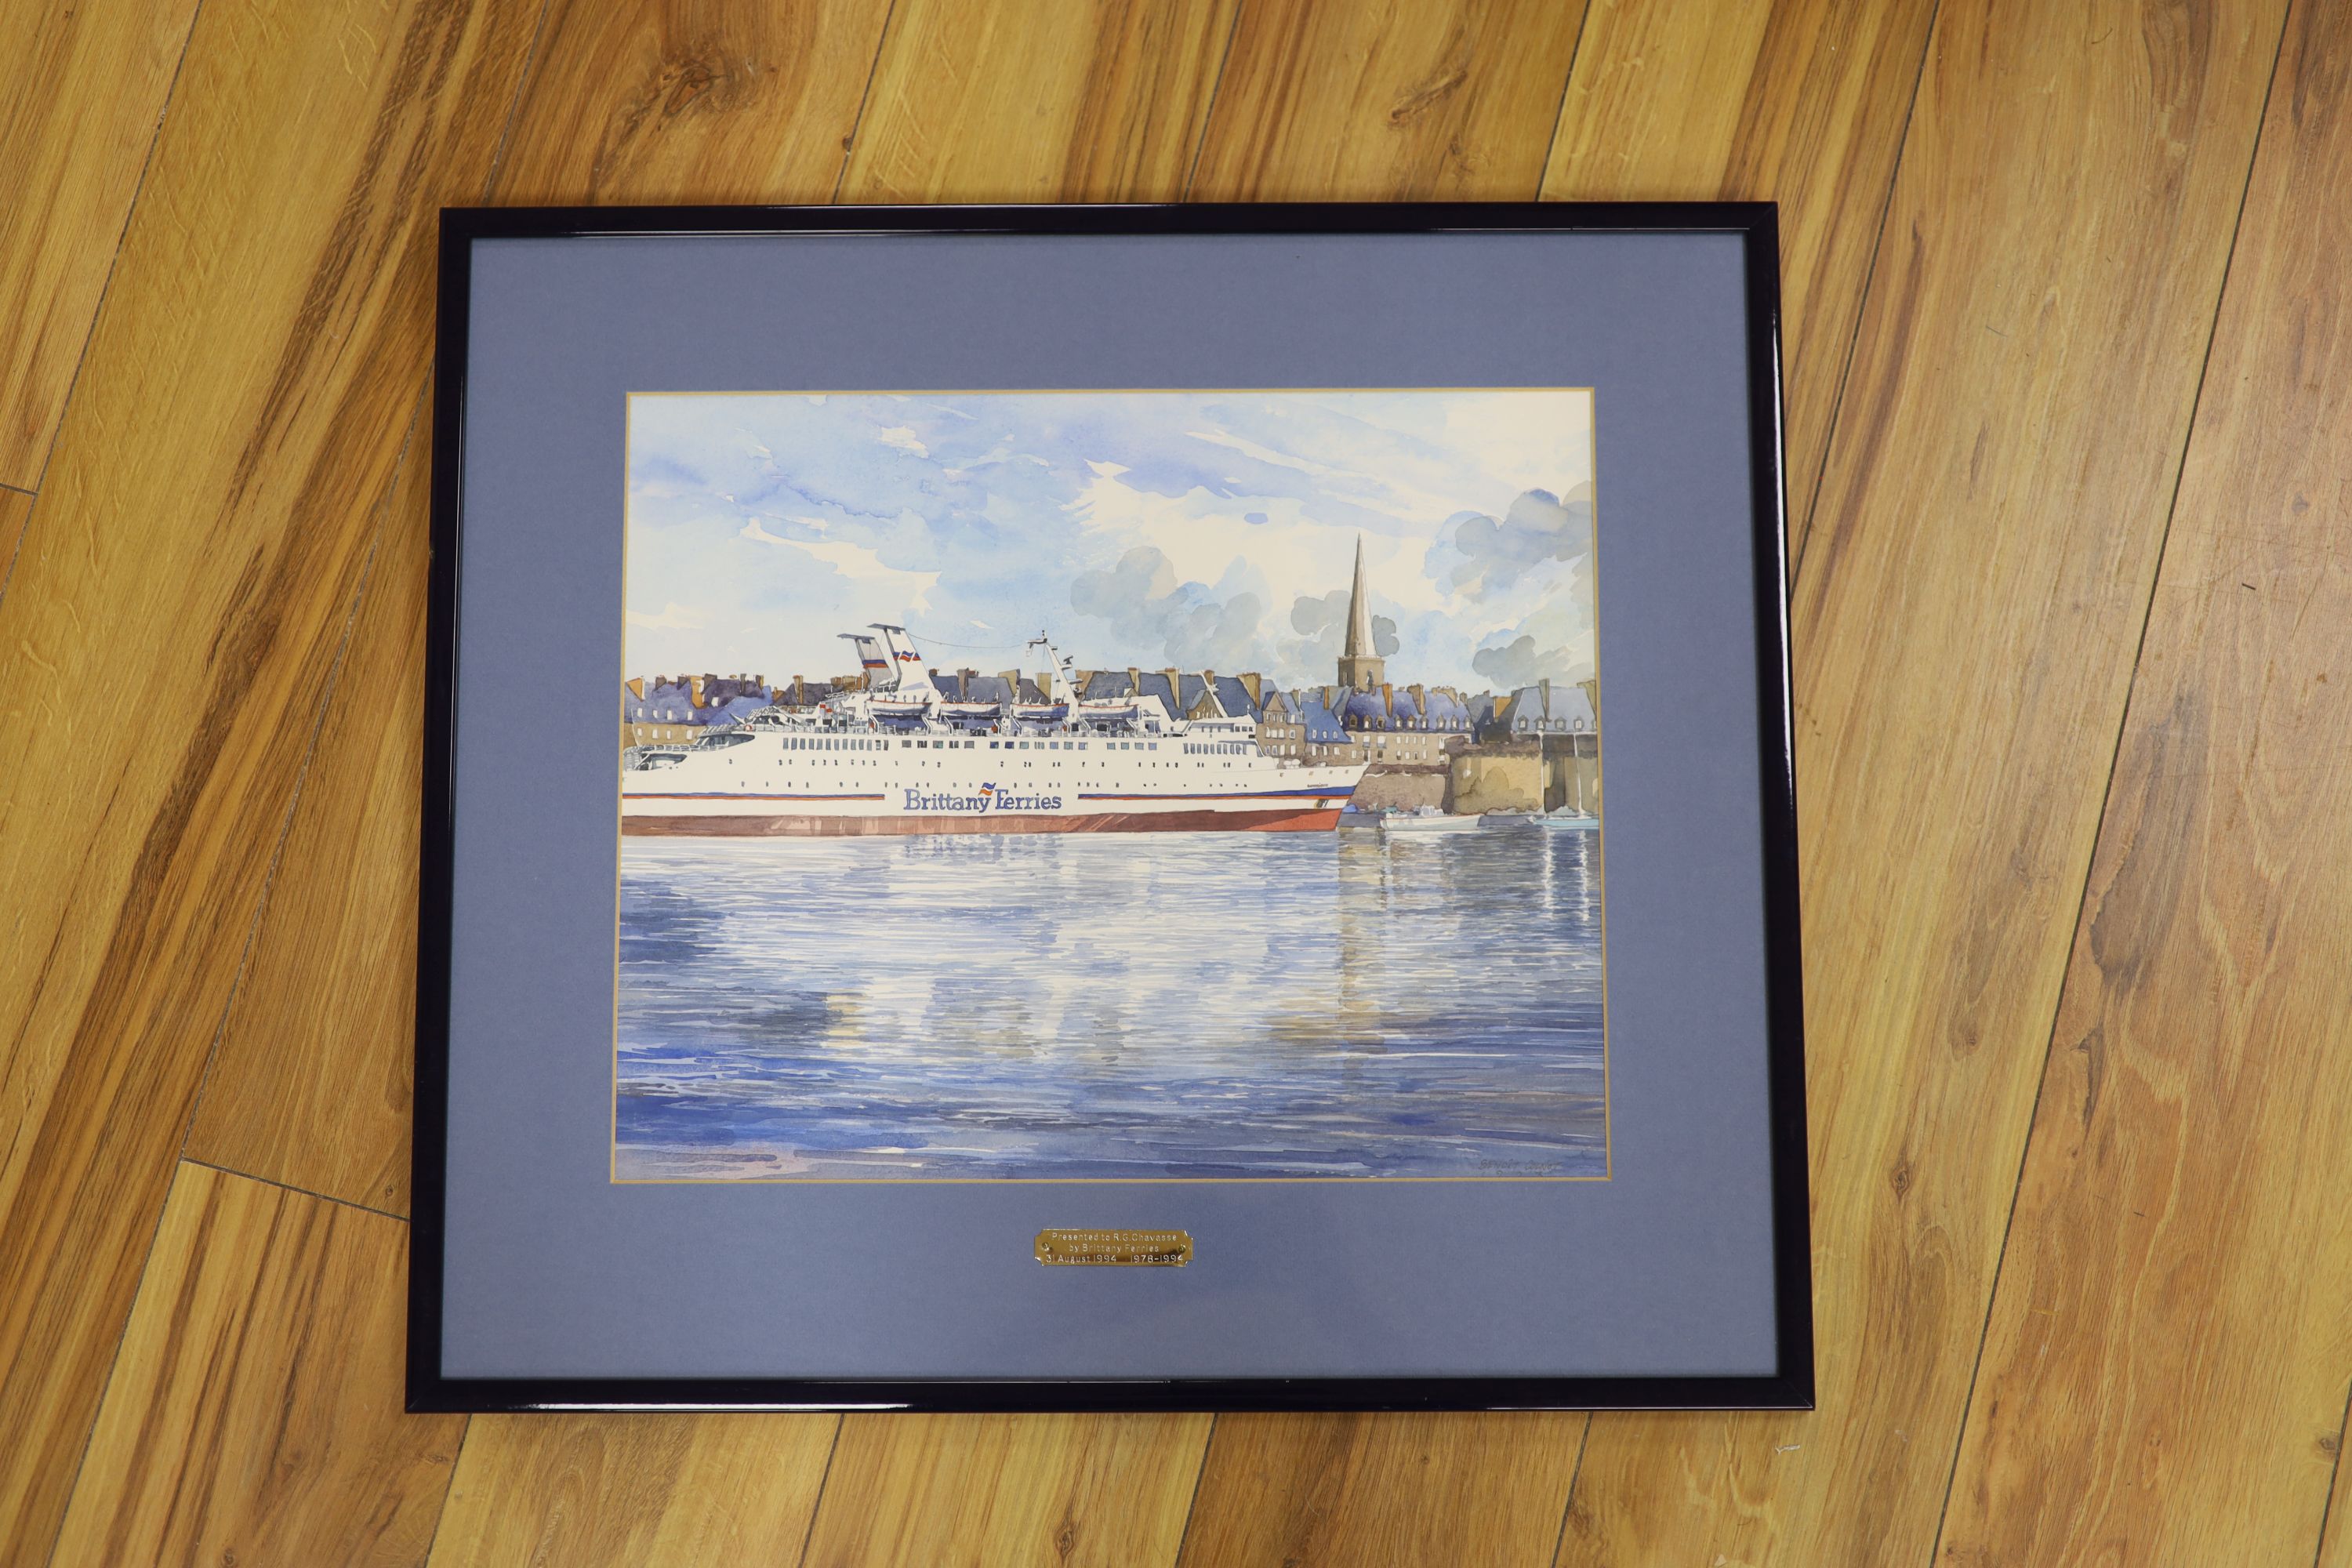 Benoit Colnot, watercolour, Brittany Ferry entering harbour, signed and dated 1993, 36 x 44cm